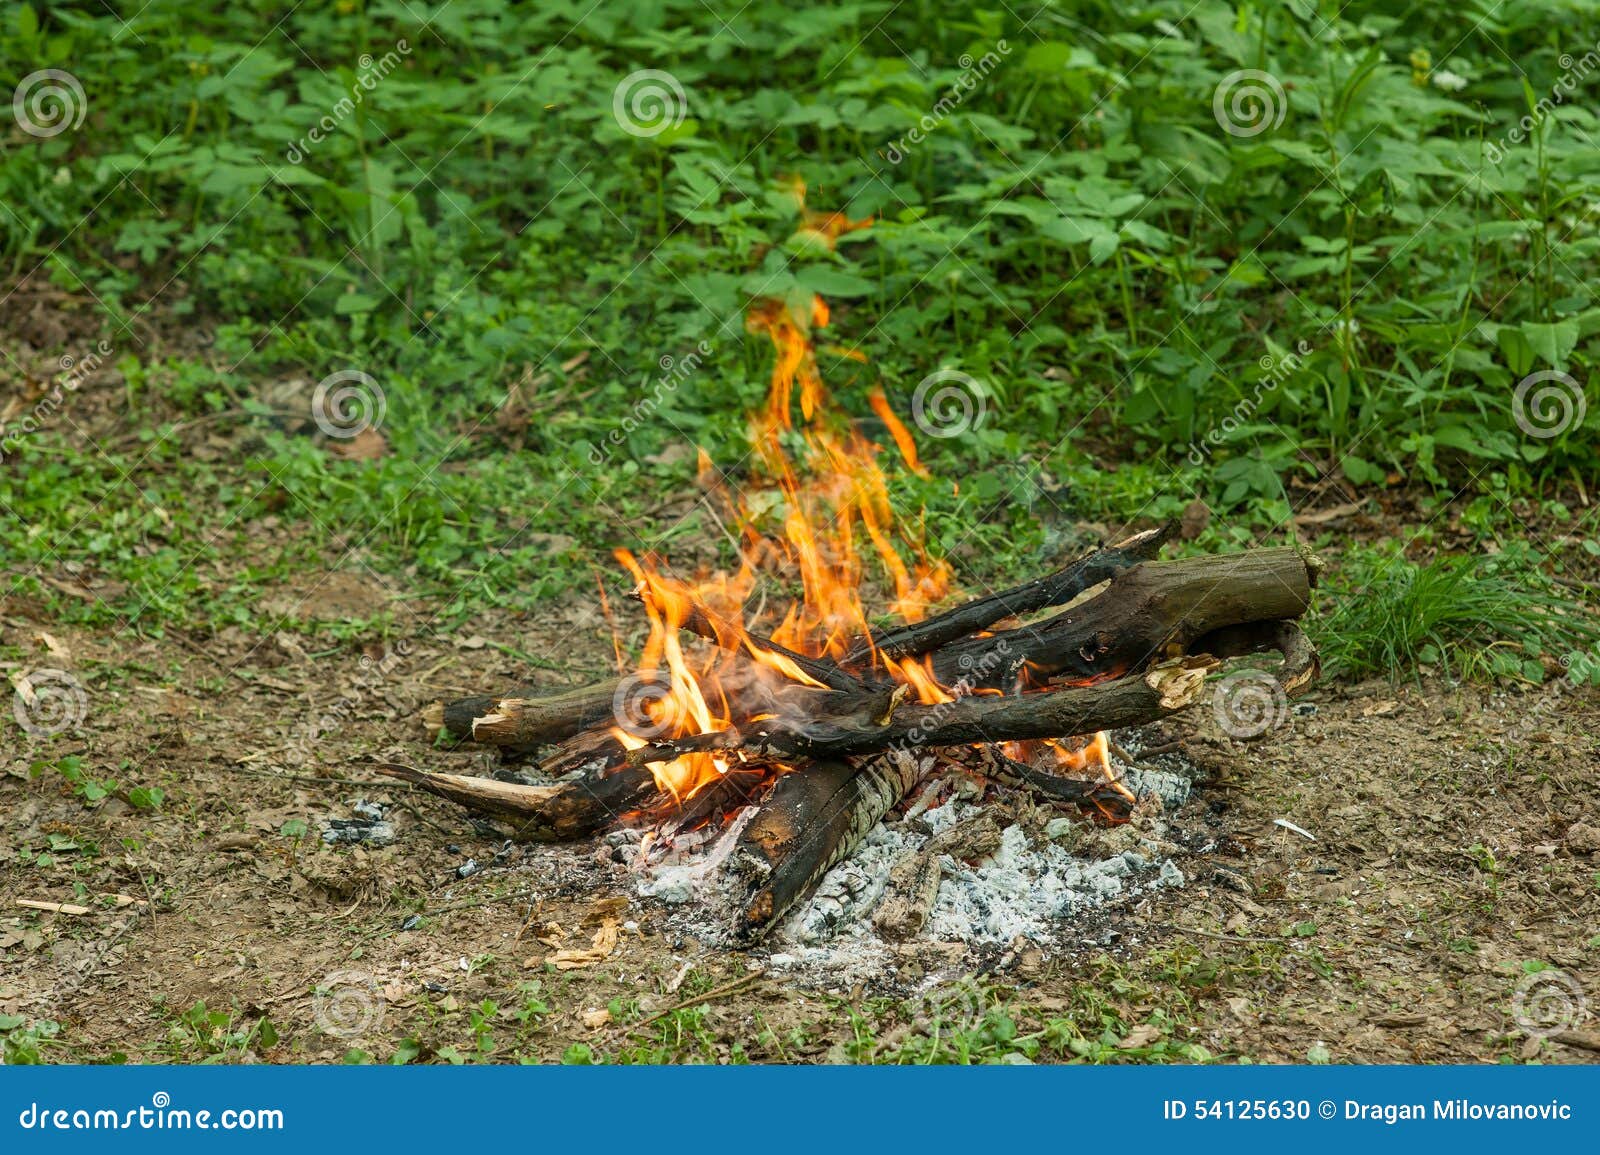 Outdoor Fire in the Spring Forest Stock Photo - Image of nature, bright ...